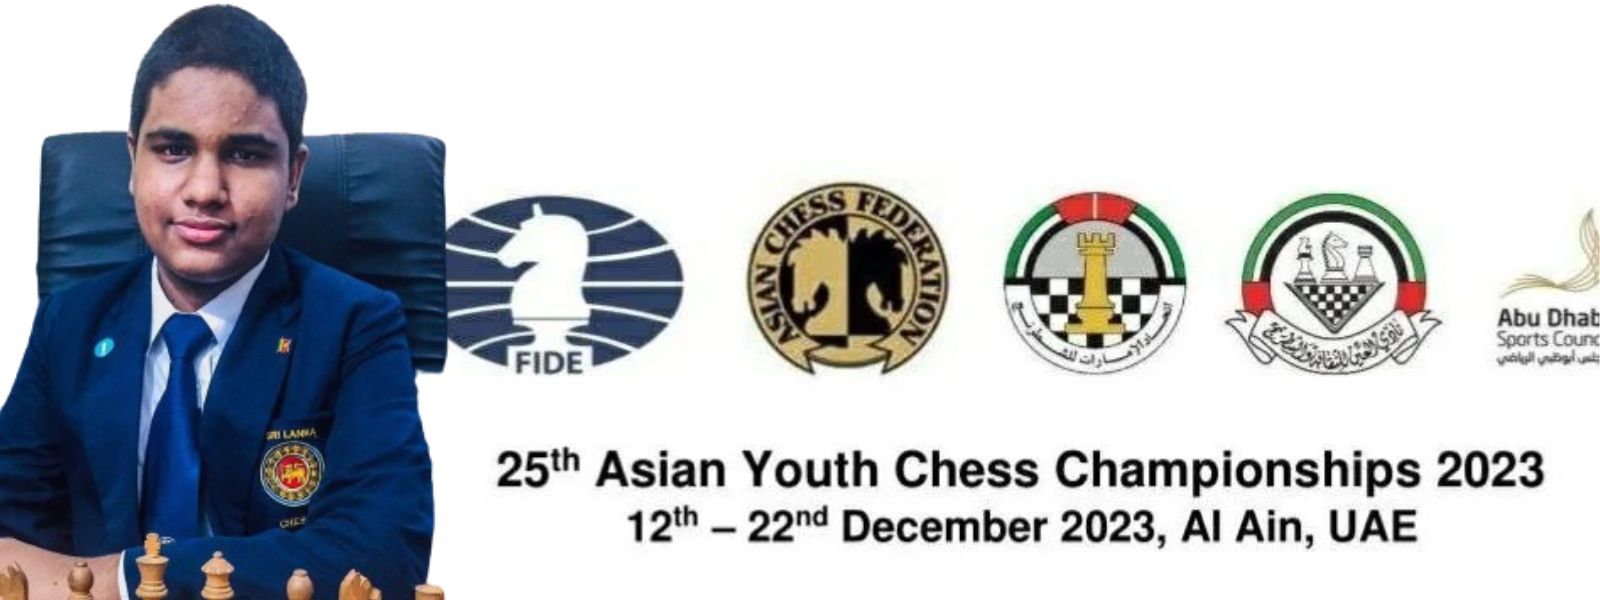 Susal gets Gold at Asian Youth Chess Championships